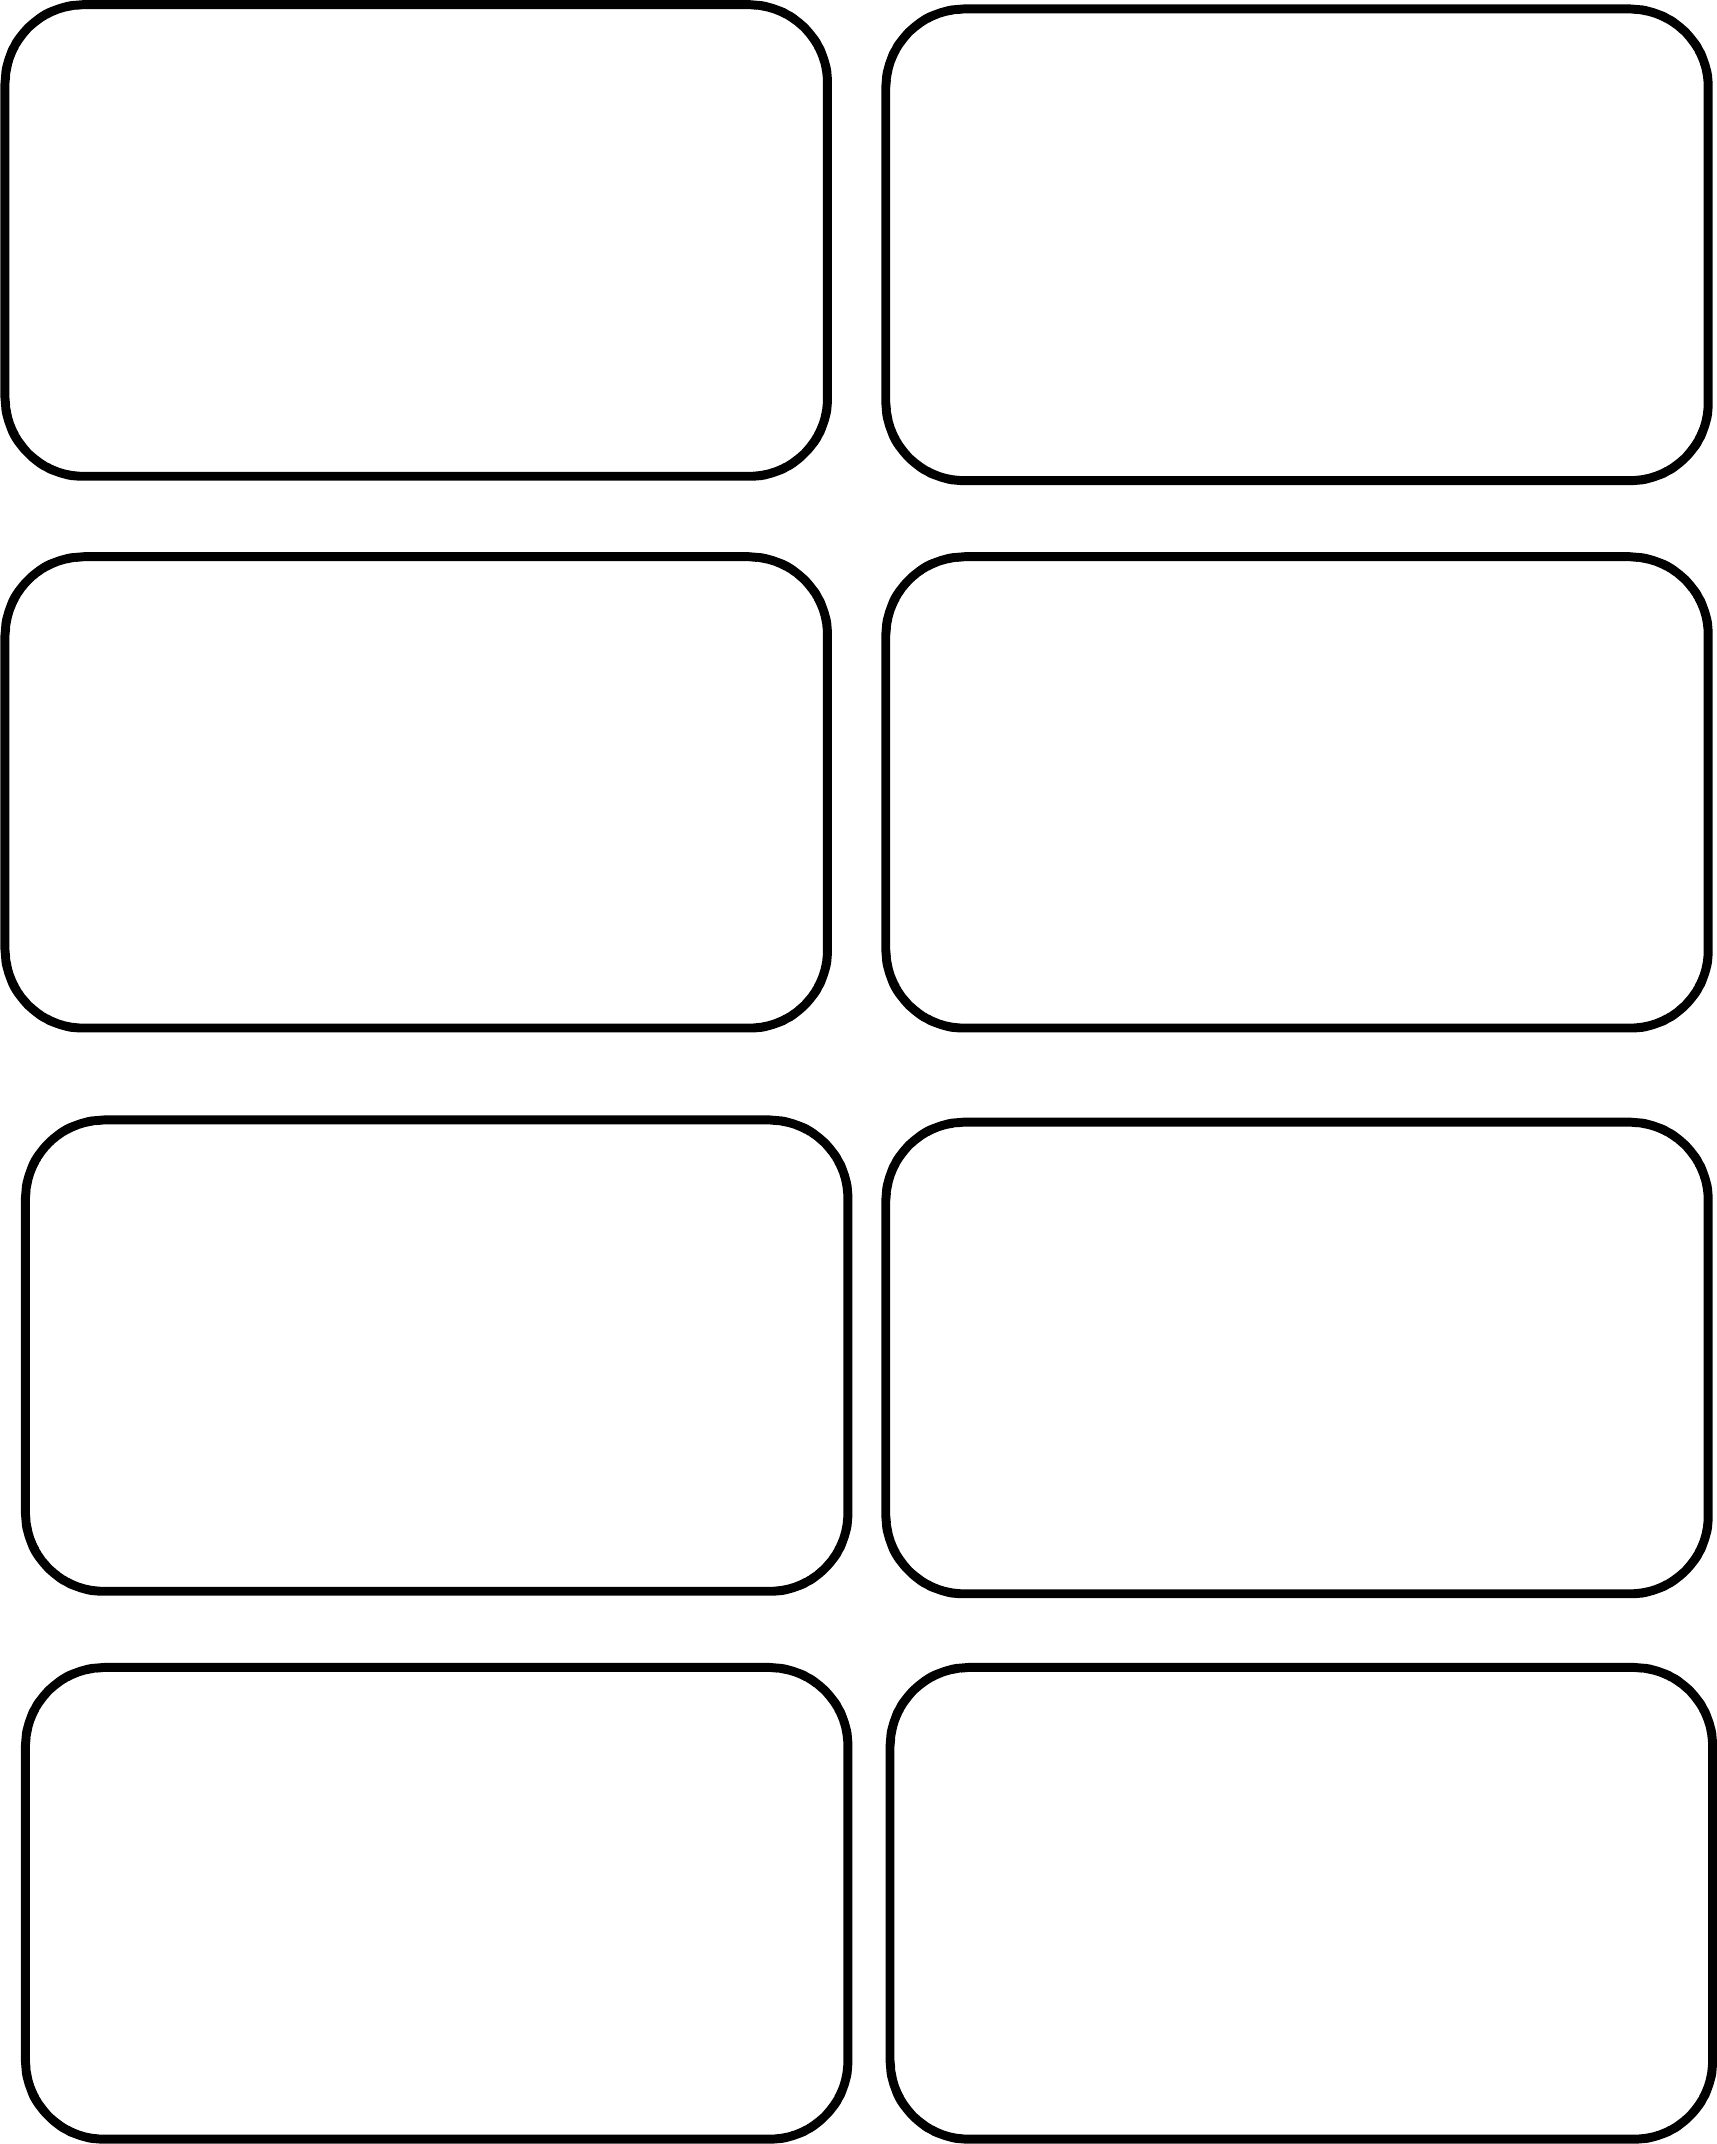 Template Of Luggage Tag Free Download Regarding Blank Luggage Tag Template